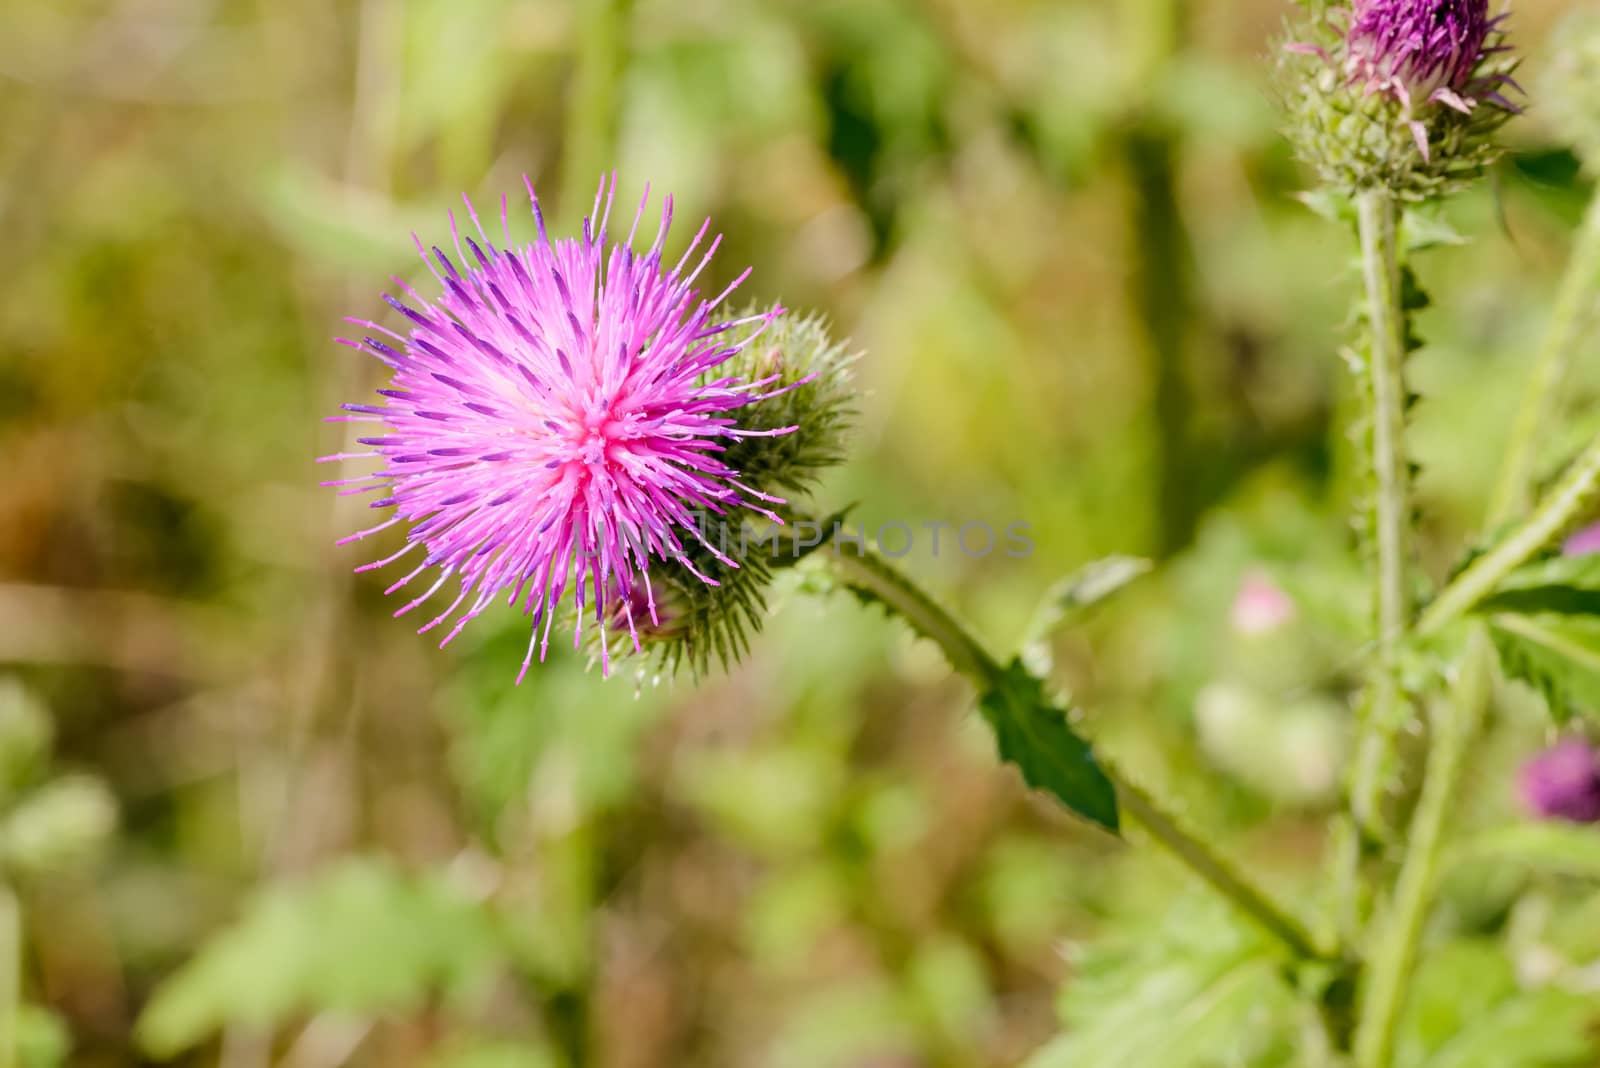 The Cirsium arvense, also called creeping thistle, is a thistle blooming in the fields and meadows